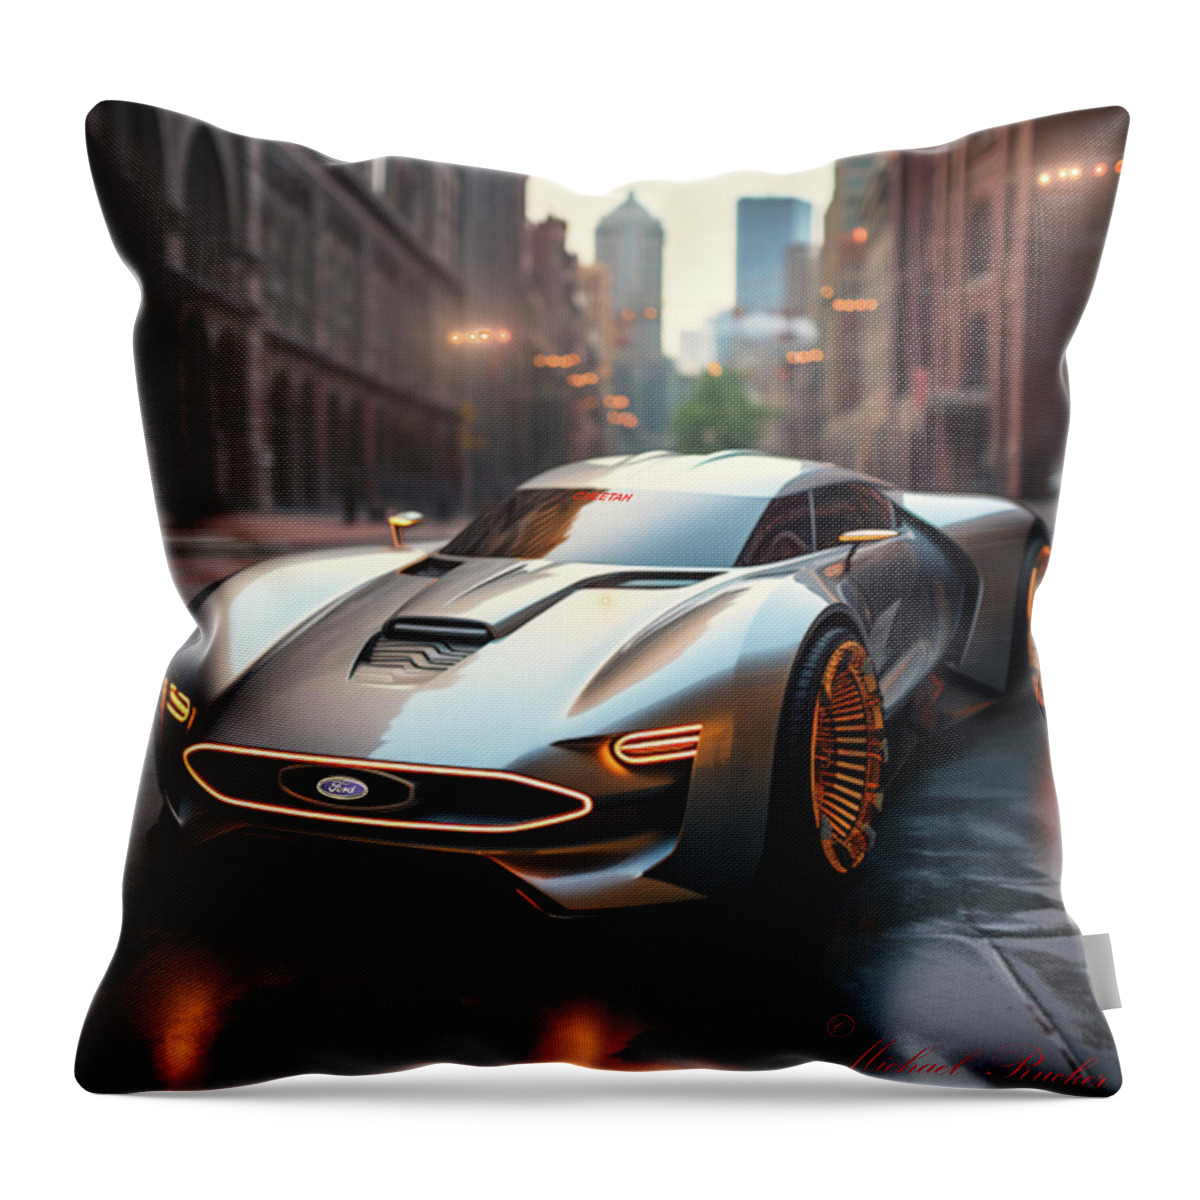 Ford Throw Pillow featuring the digital art Ford Cheetah by Michael Rucker